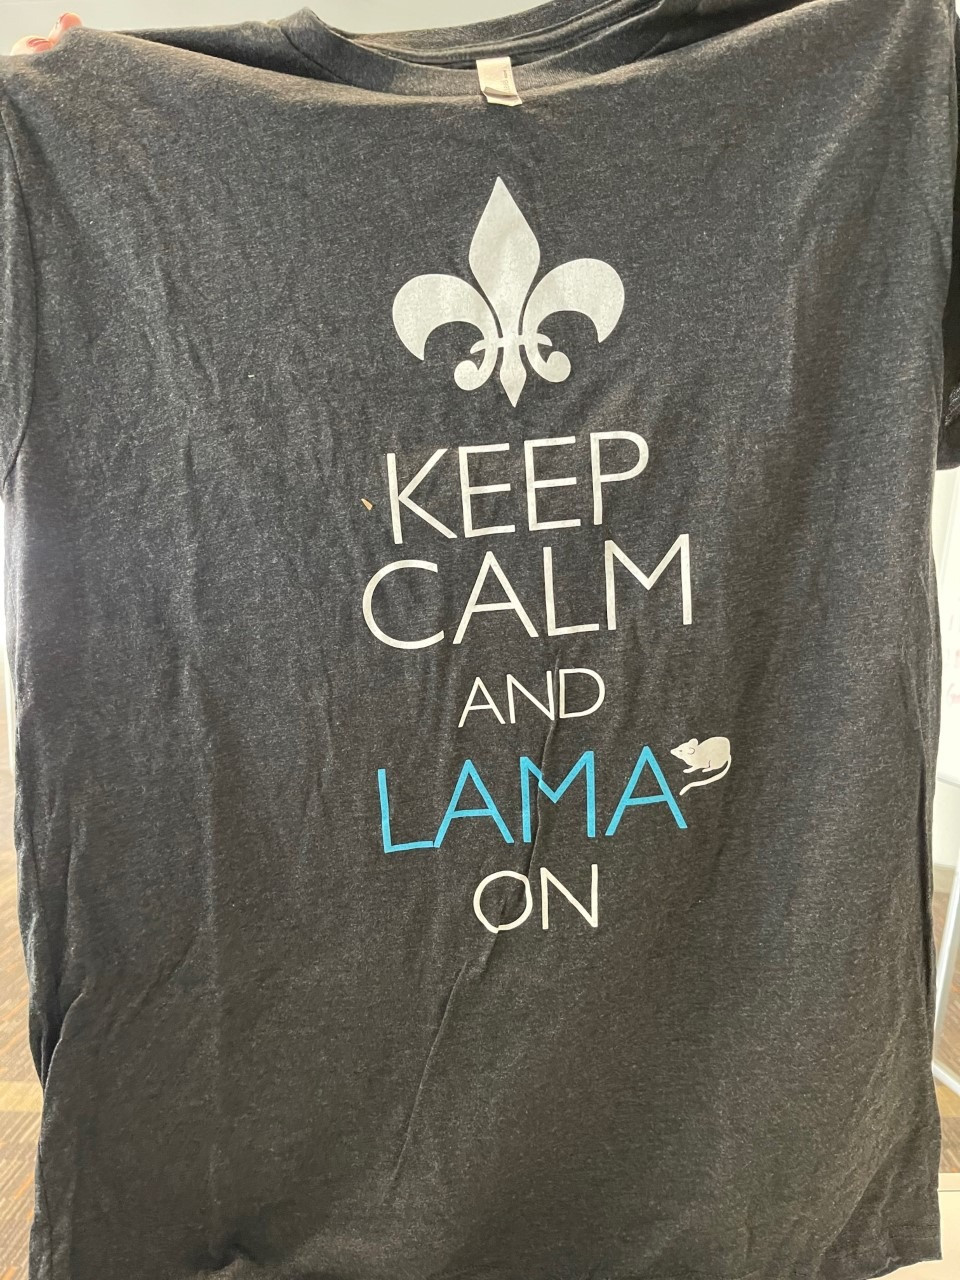 Keep Calm and Lama On T-Shirt #2 - Size XL